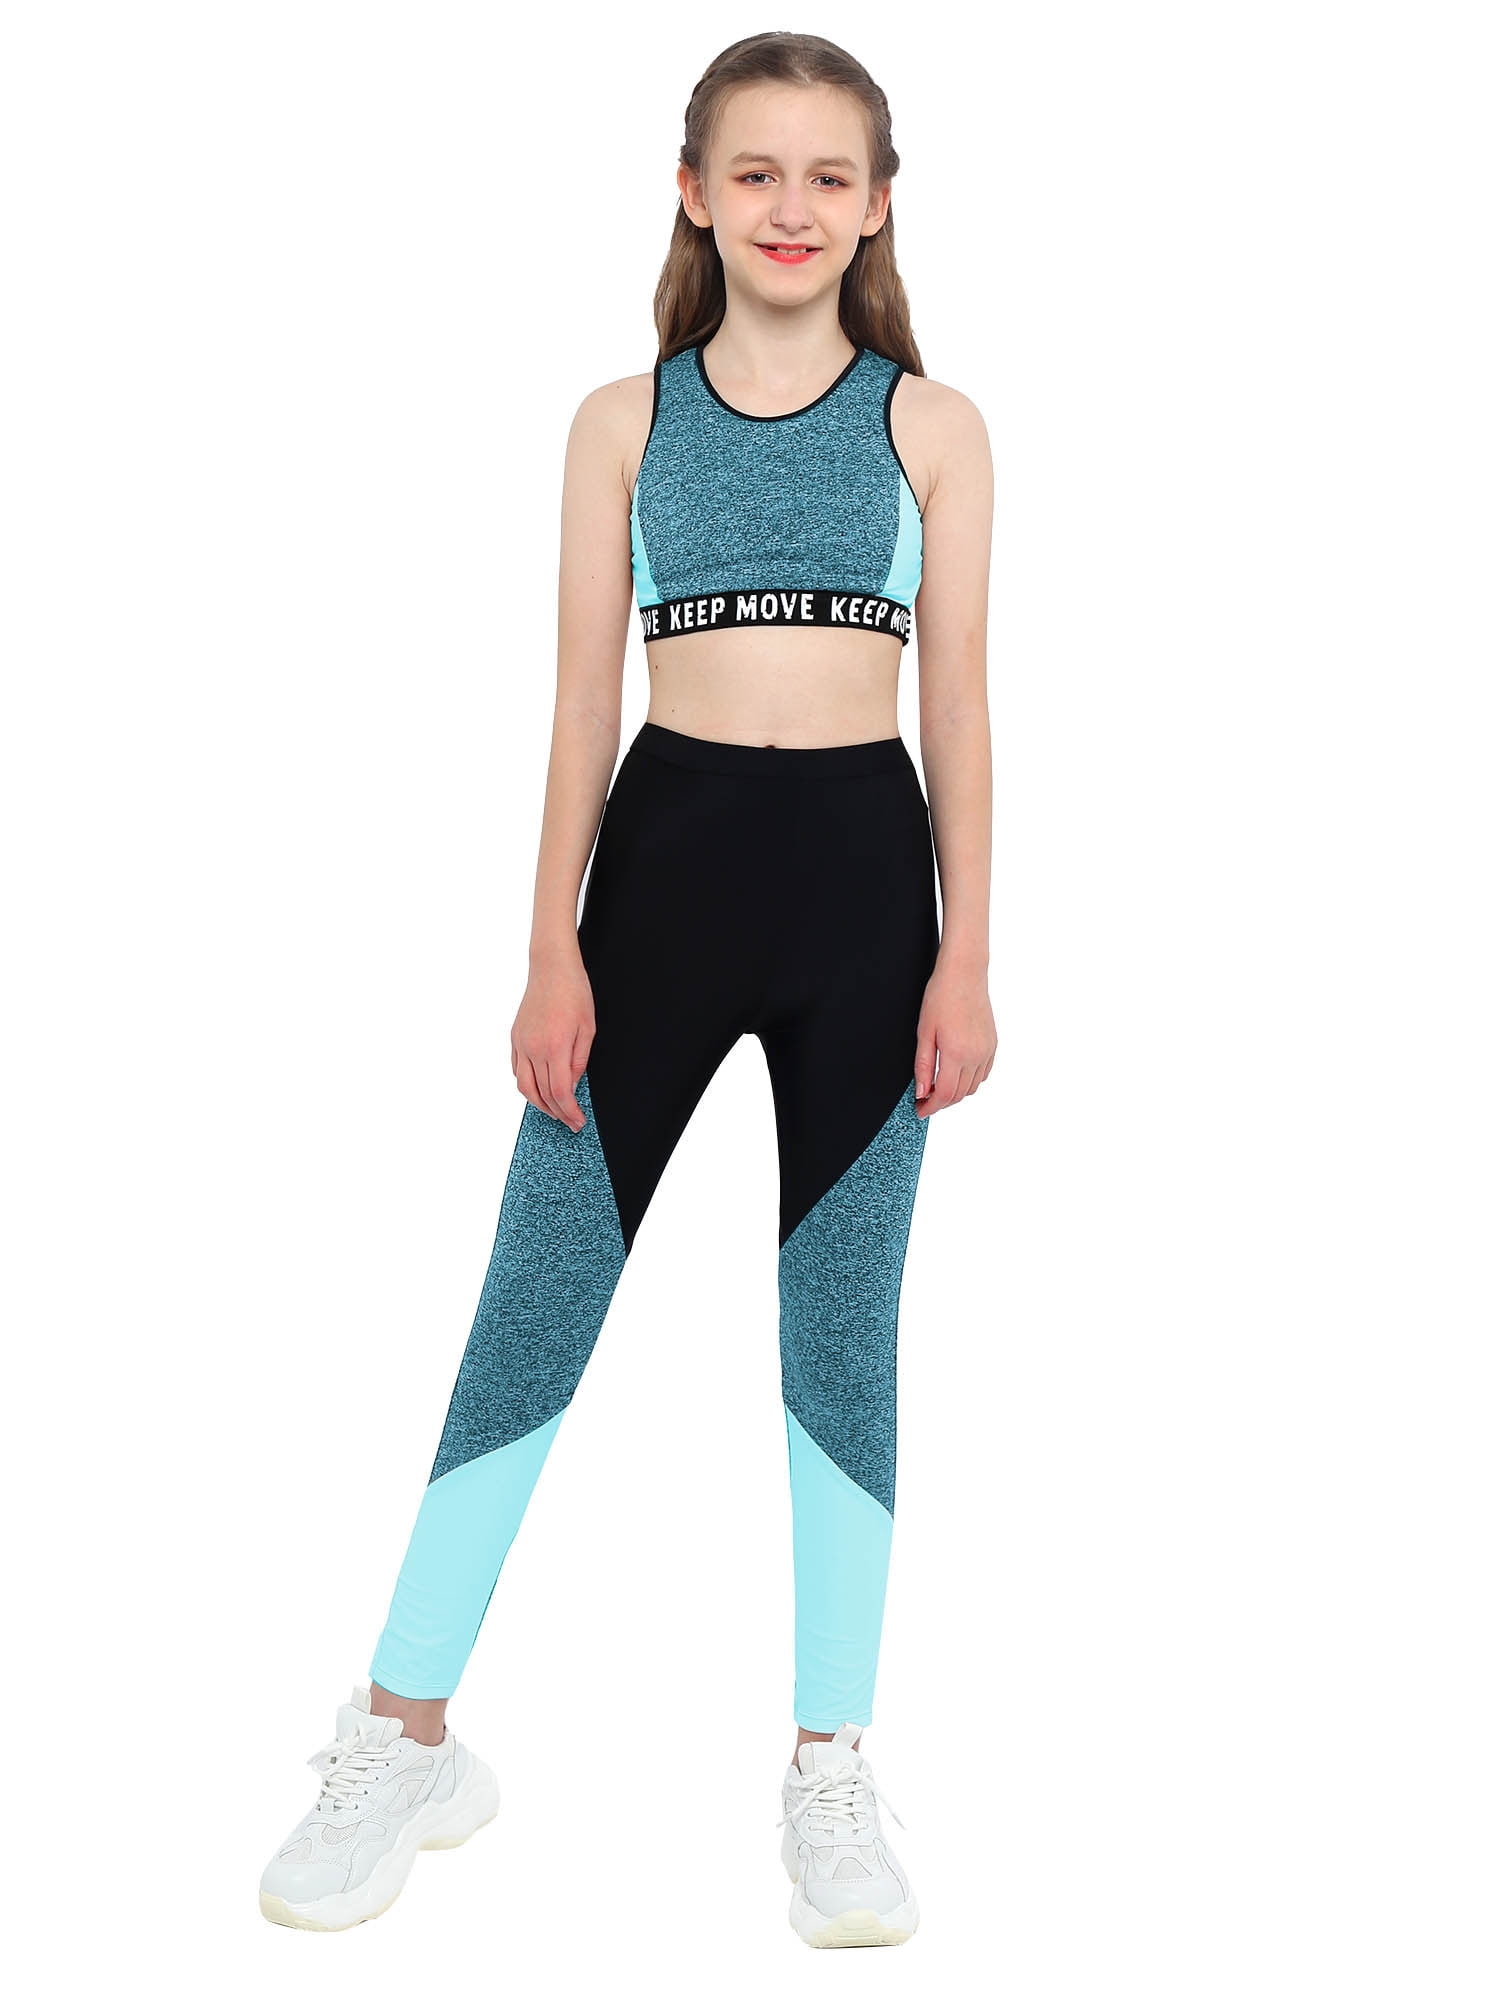 inhzoy Kids Girls Athletic Outfit Sports Bra Crop Top with Yoga Leggings  Blue 10